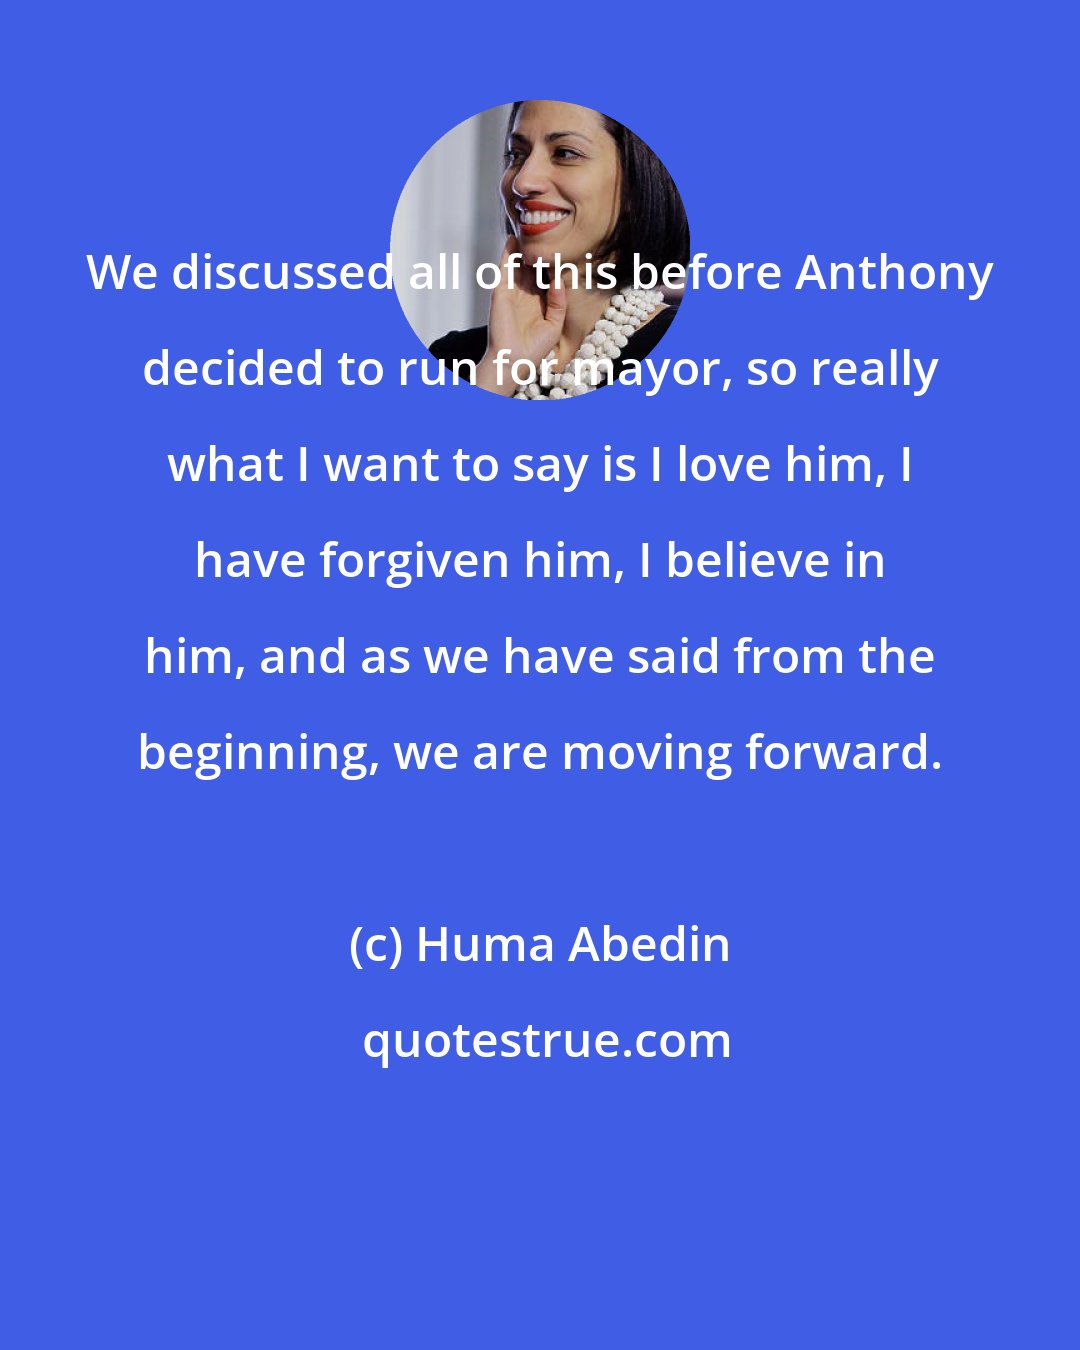 Huma Abedin: We discussed all of this before Anthony decided to run for mayor, so really what I want to say is I love him, I have forgiven him, I believe in him, and as we have said from the beginning, we are moving forward.